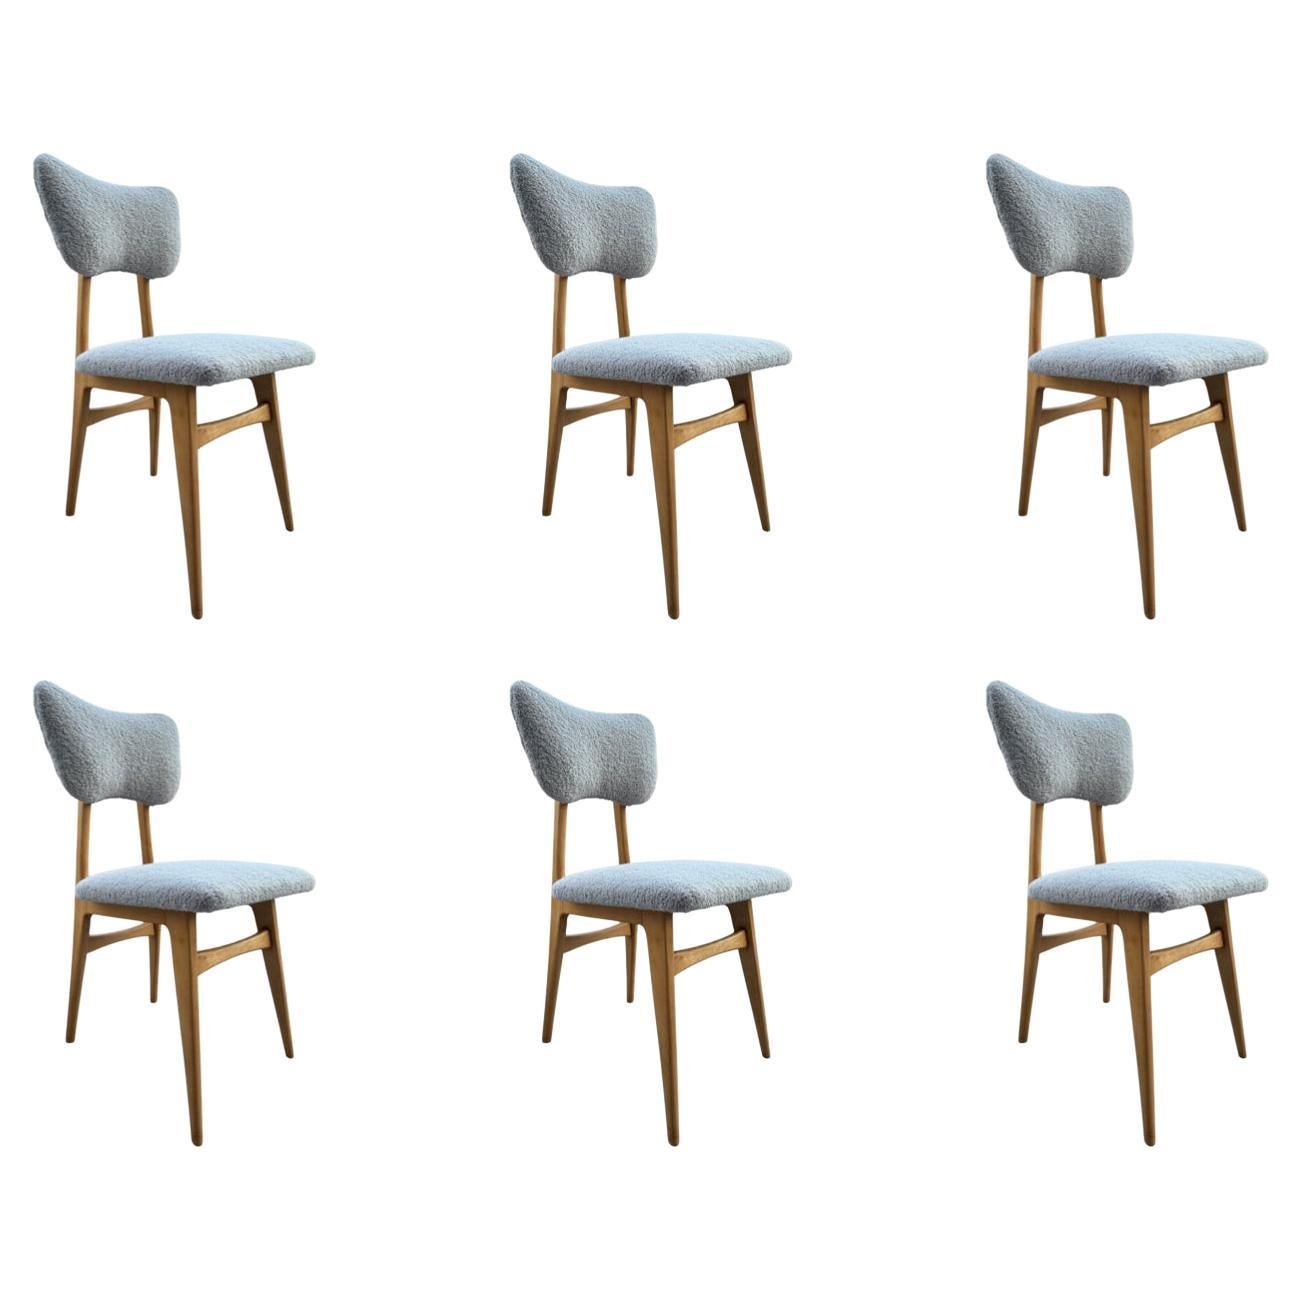 Set of 6 Midcentury Grey Bouclé Dining Chairs, 1960s